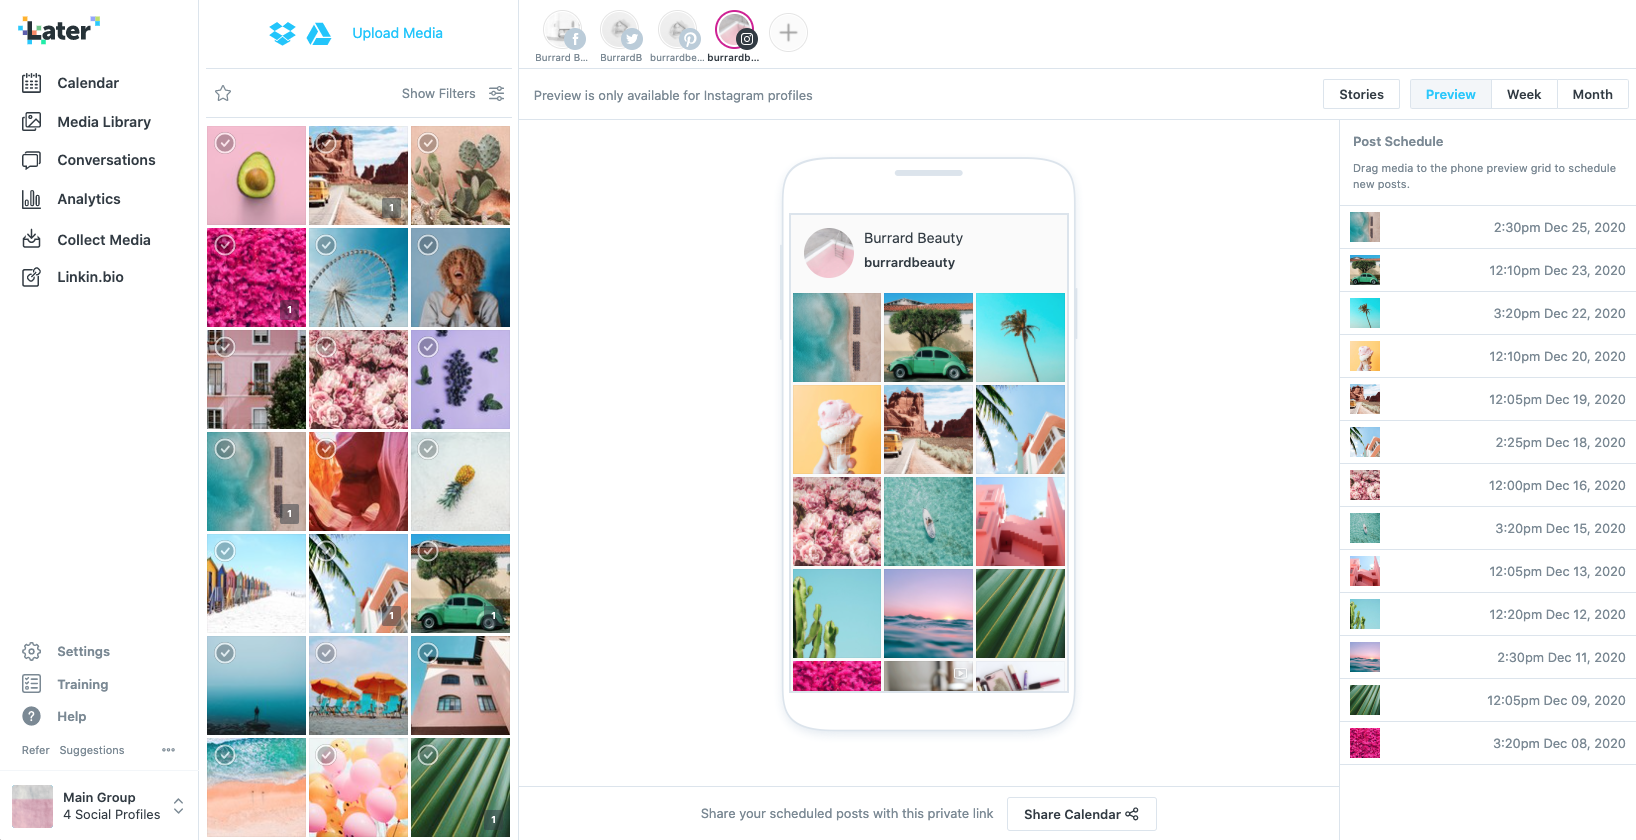 Screenshot of the Later app showcasing the Visual Instagram Planner